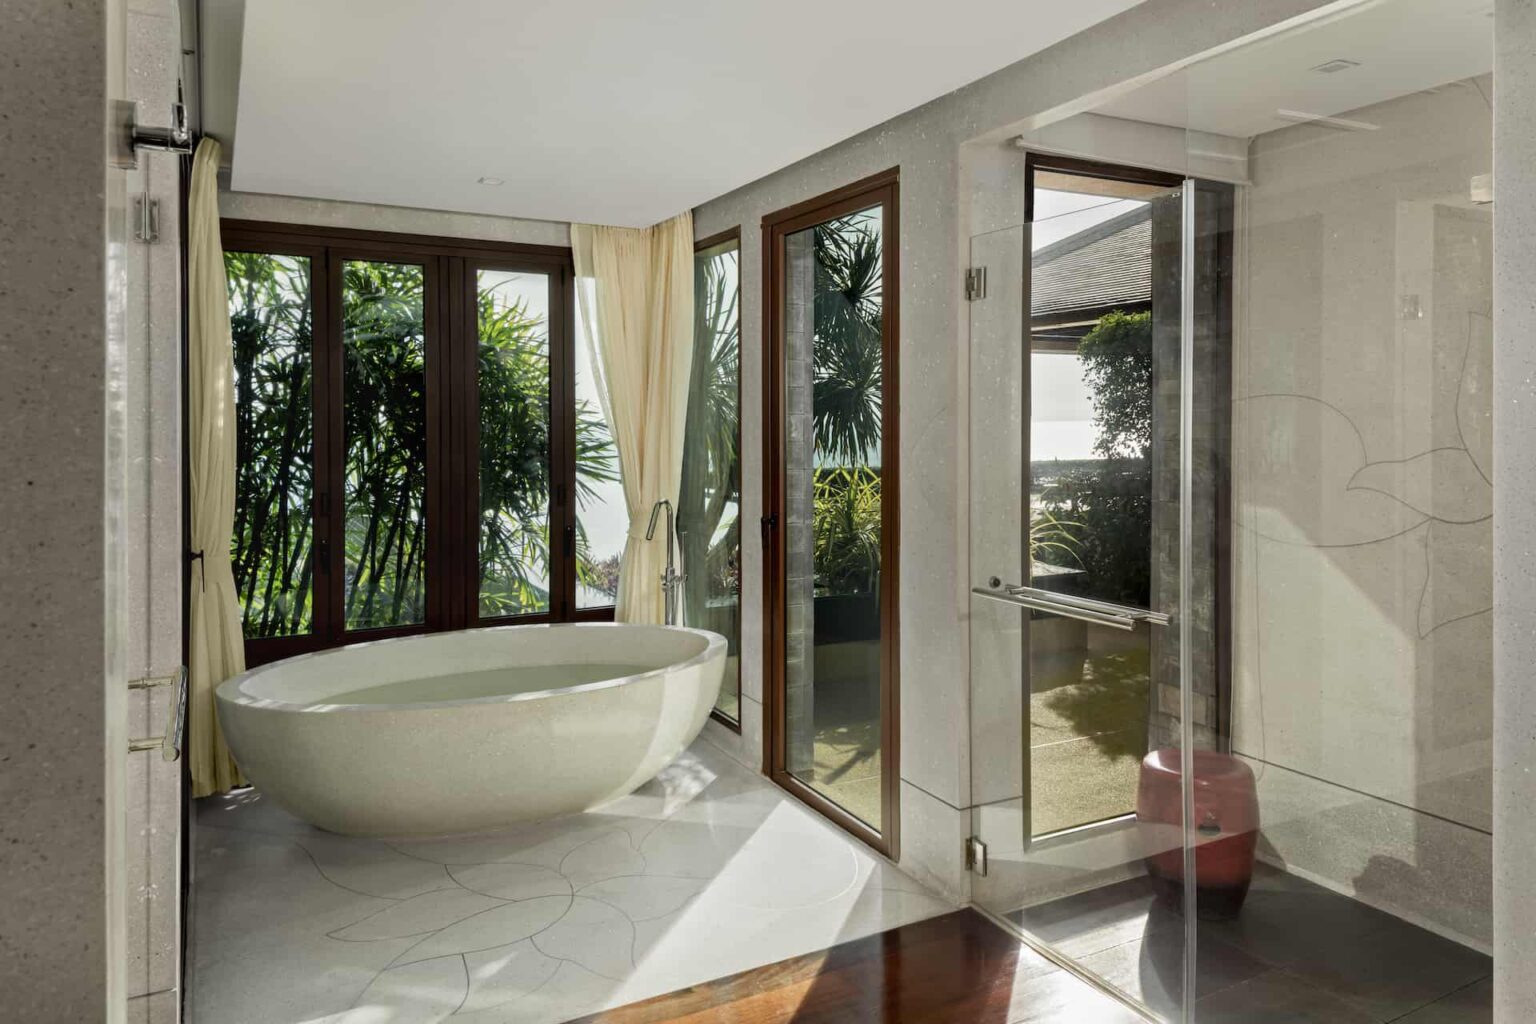 Grand Residence Pool Villa bathroom with freestanding tub and outdoor shower